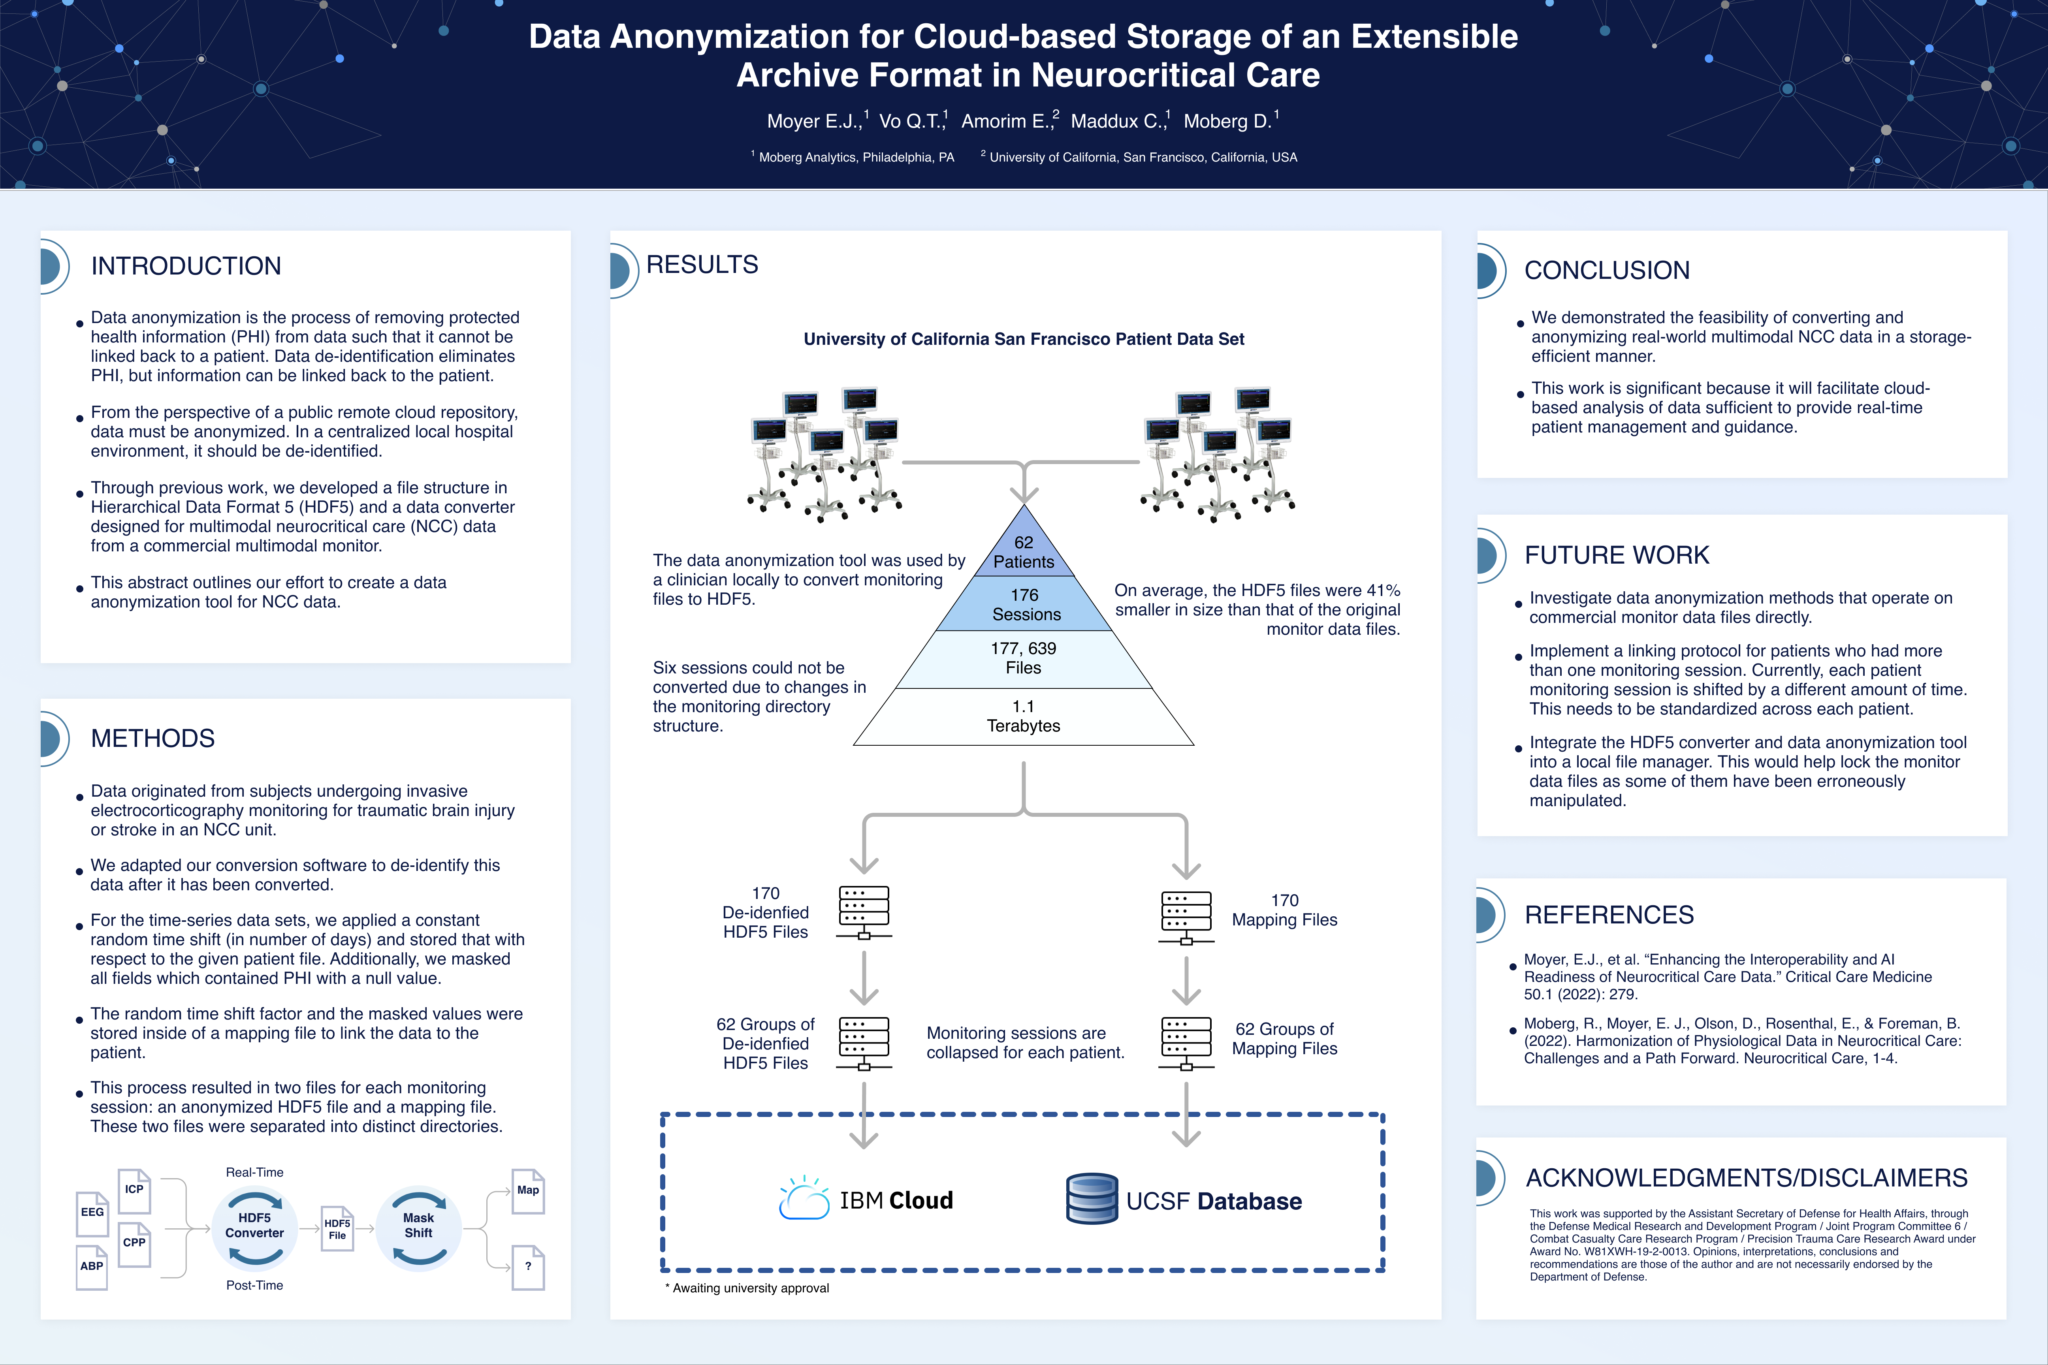 Data Anonymization for Cloud-Based Storage of an Extensible Archive Format in Neurocritical Care